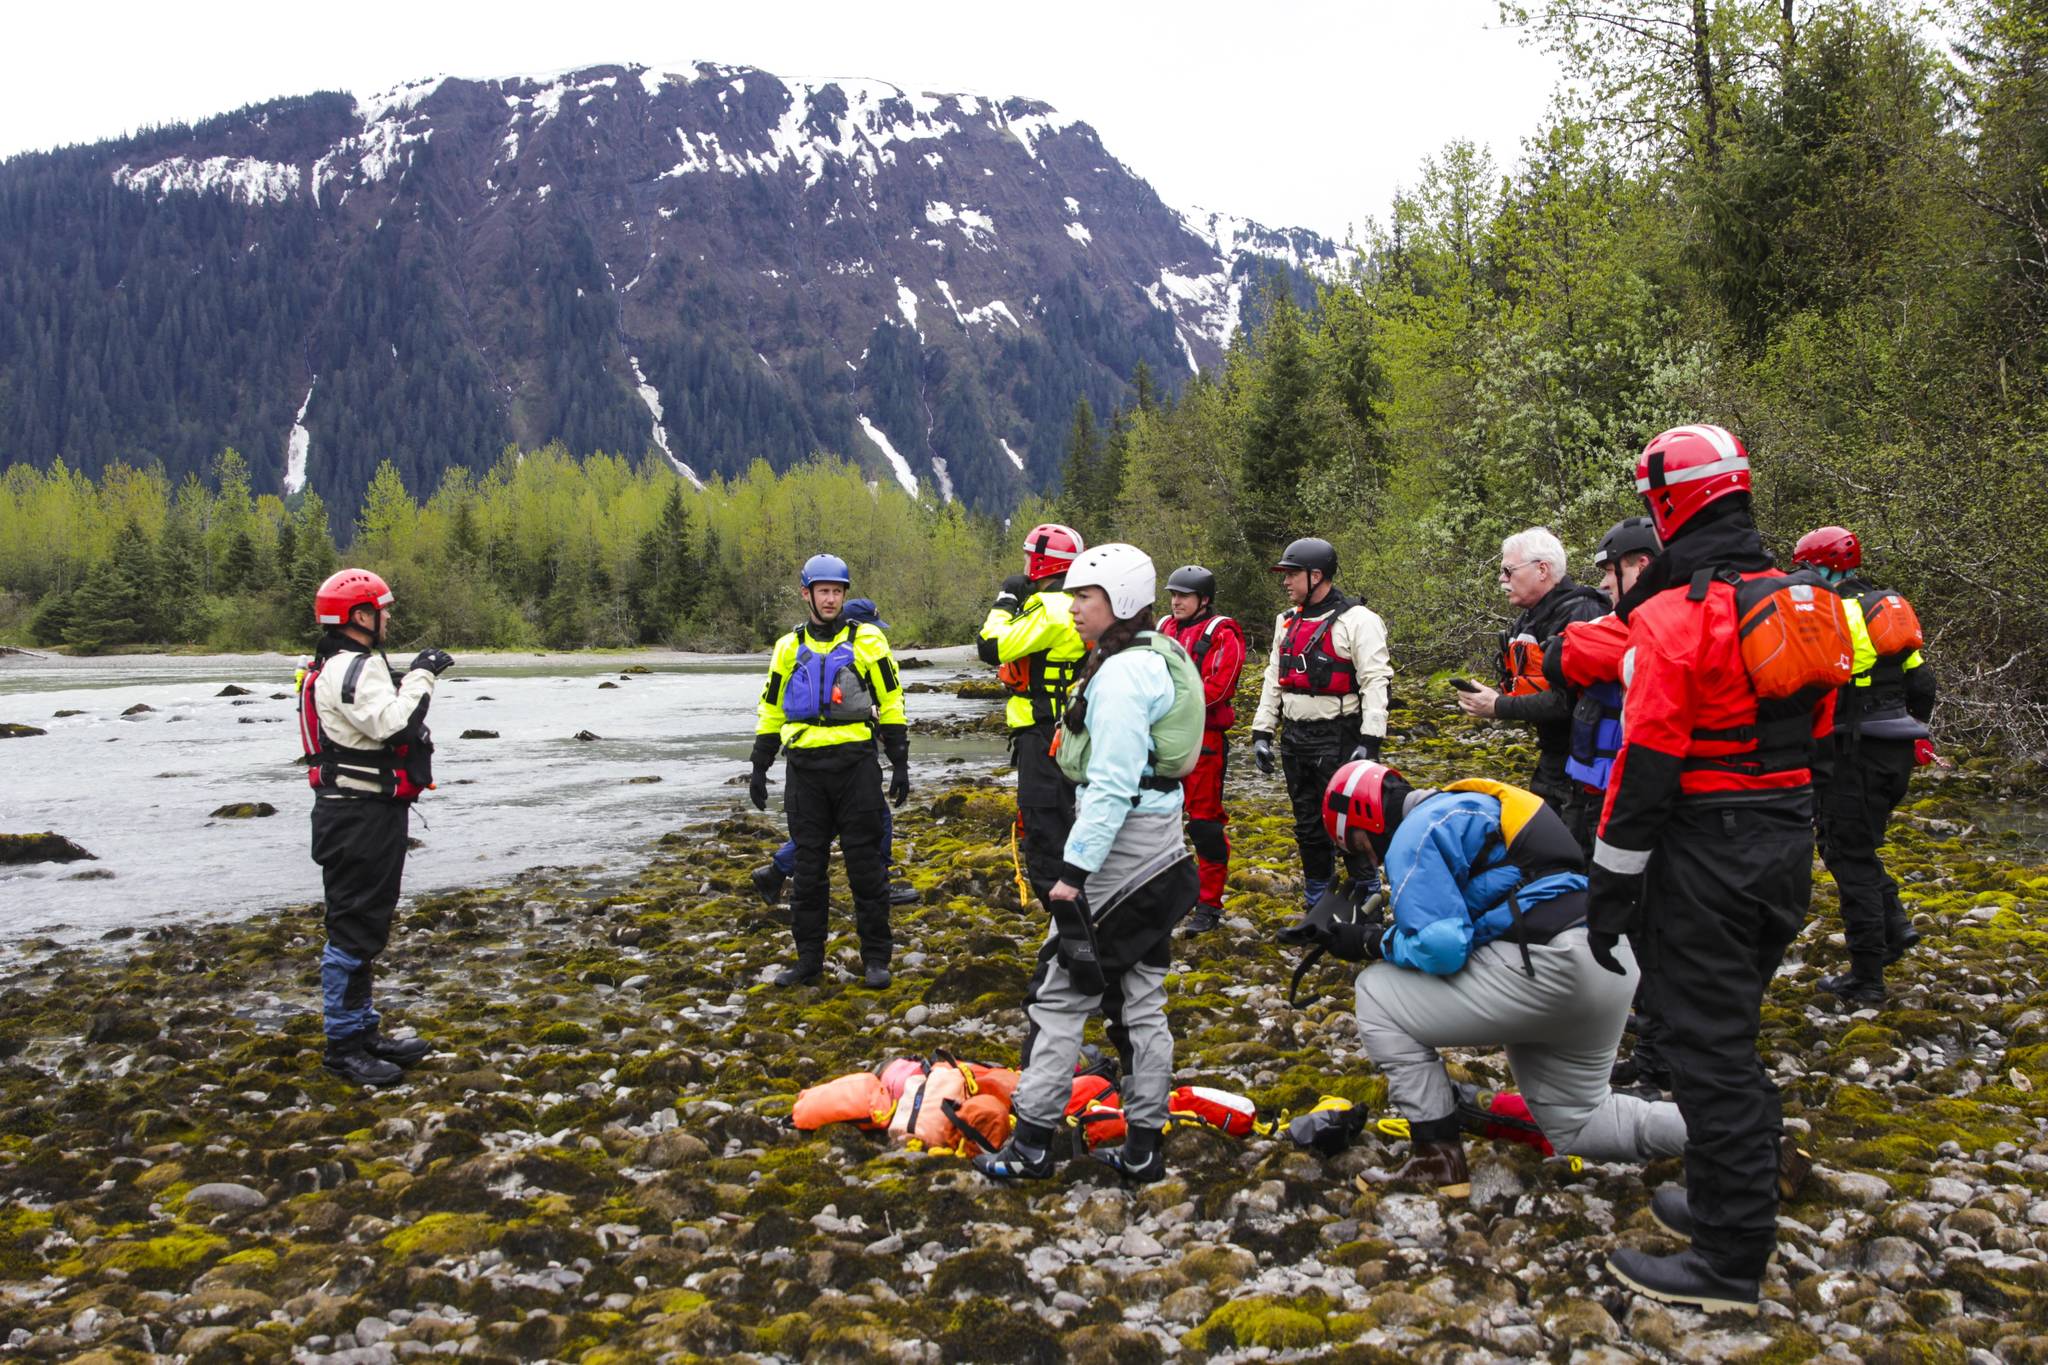 Capt. Jayme Johns, left, head of the Capital City Fire/Rescue’s water rescue team, briefs a group of CCFR personnel and Coast Guardsmen as they prepare to practice swiftwater rescues in the Mendenhall River on as National Boating Safety Week wraps up May 27, 2021. (Michael S. Lockett / Juneau Empire)